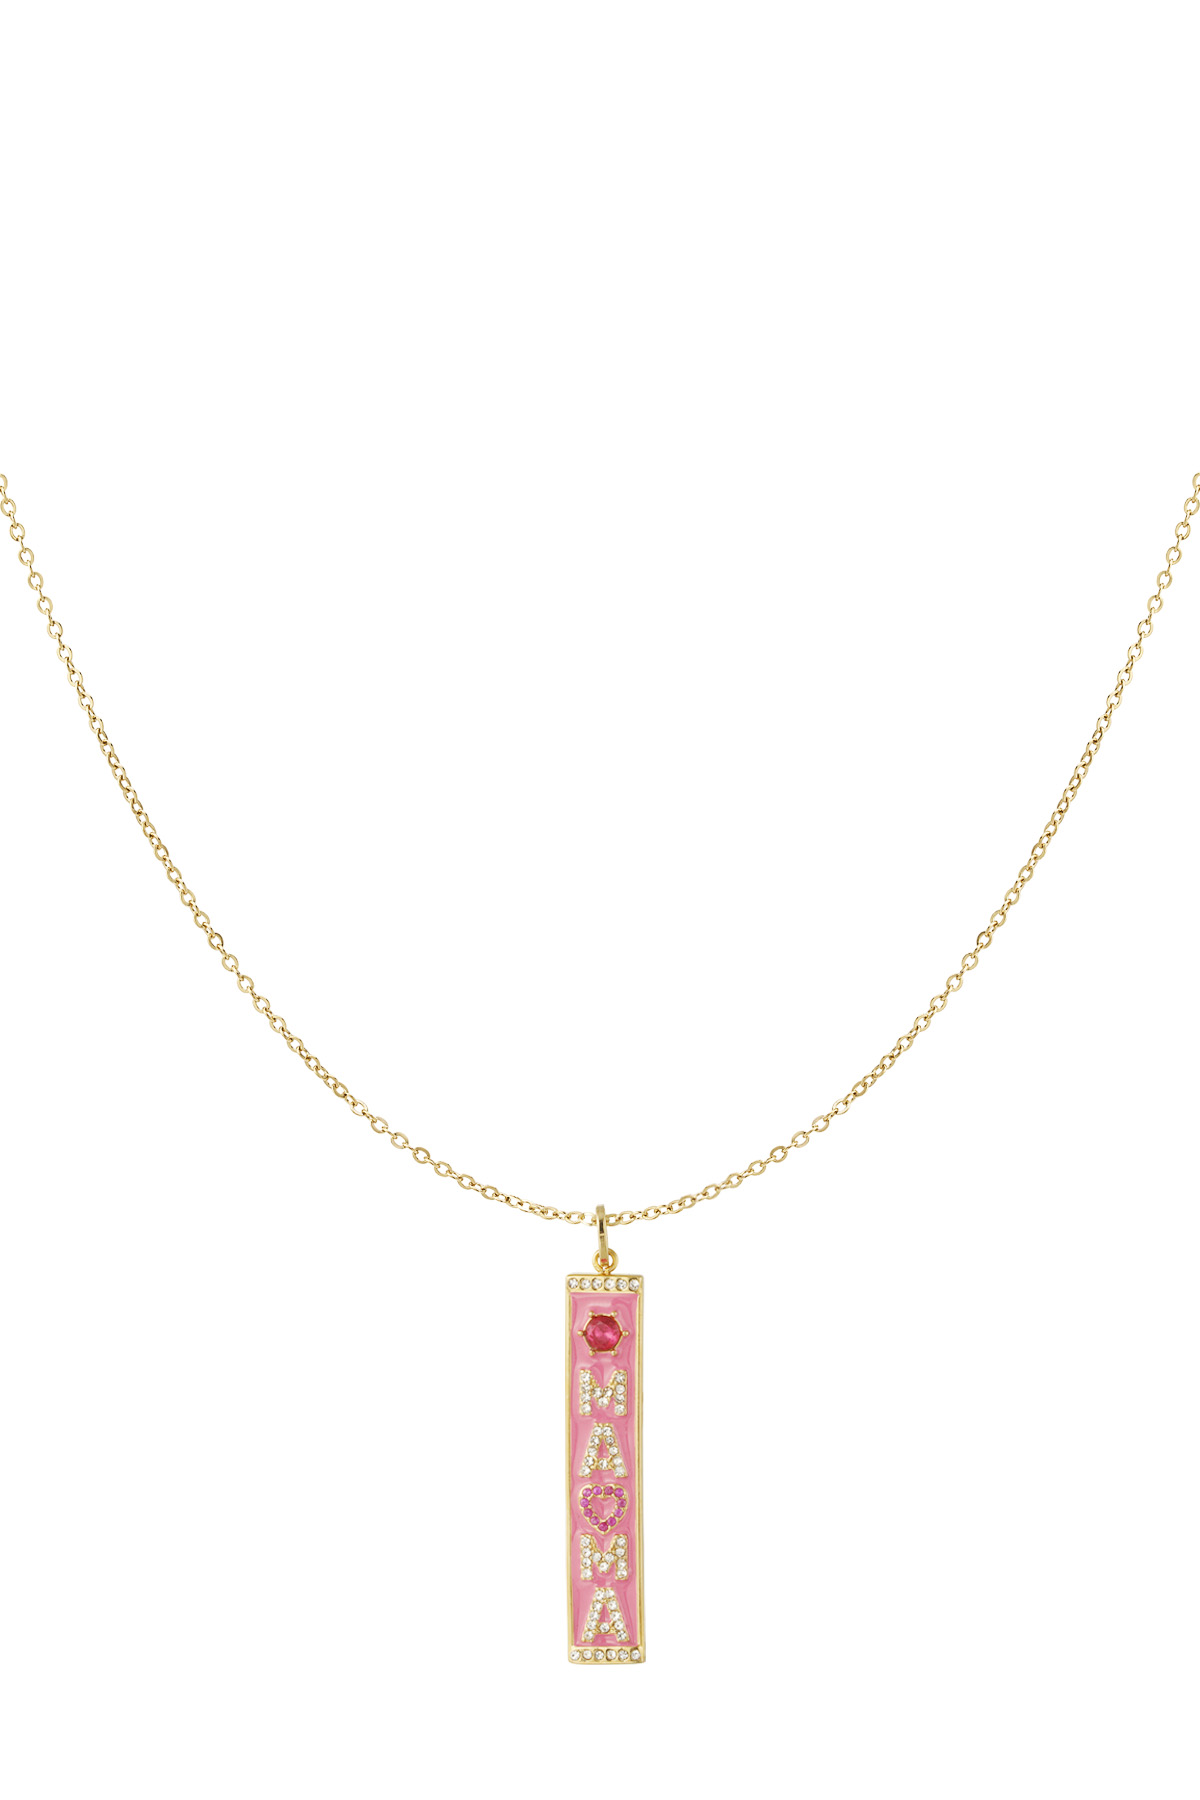 Necklace mama love - gold